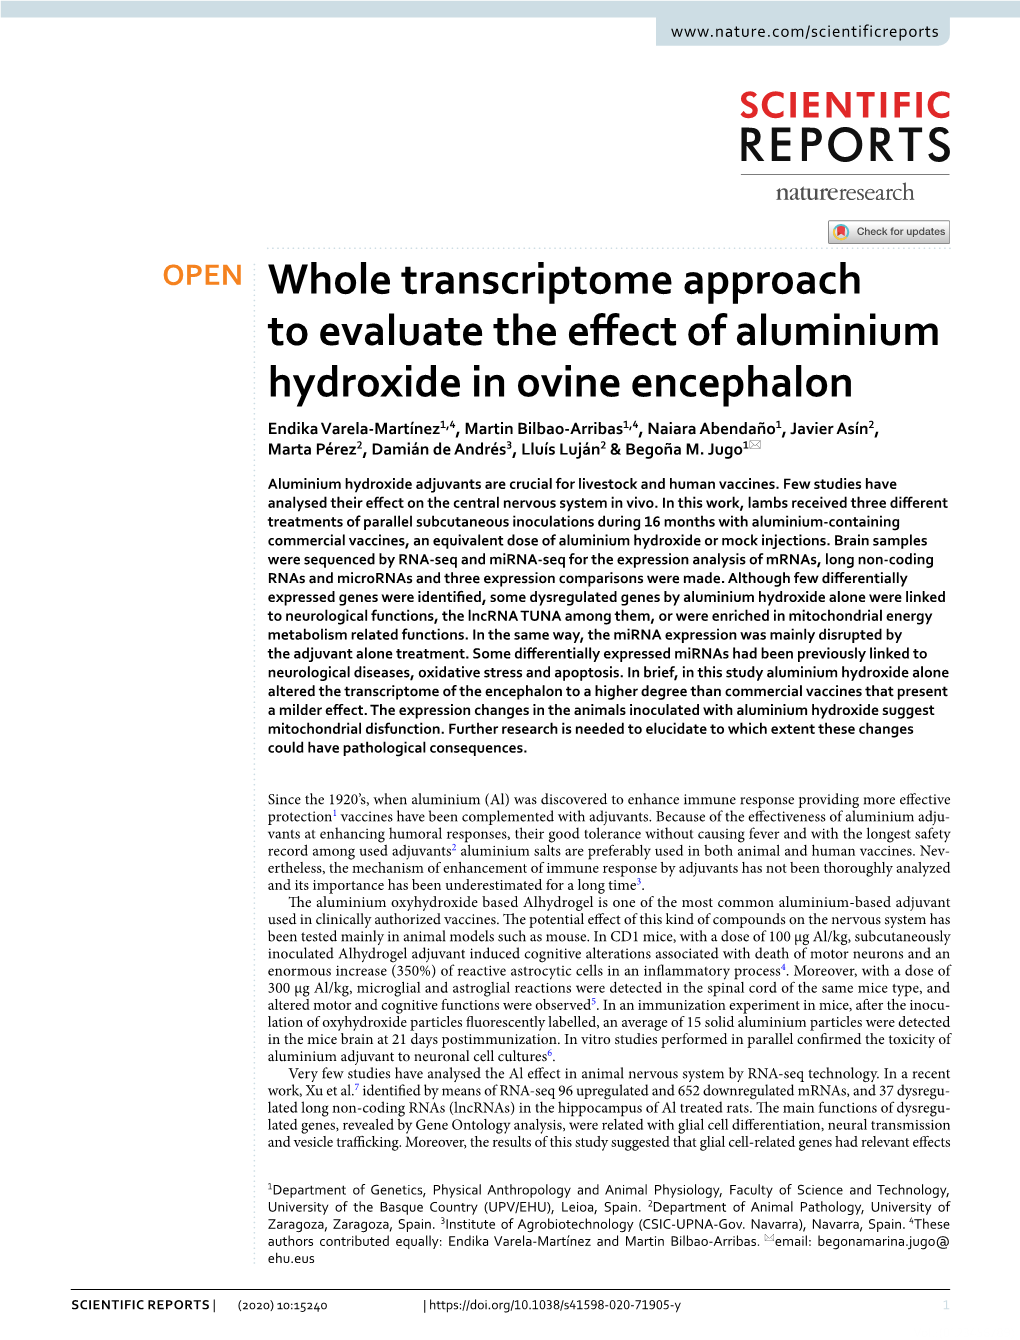 Whole Transcriptome Approach to Evaluate the Effect of Aluminium